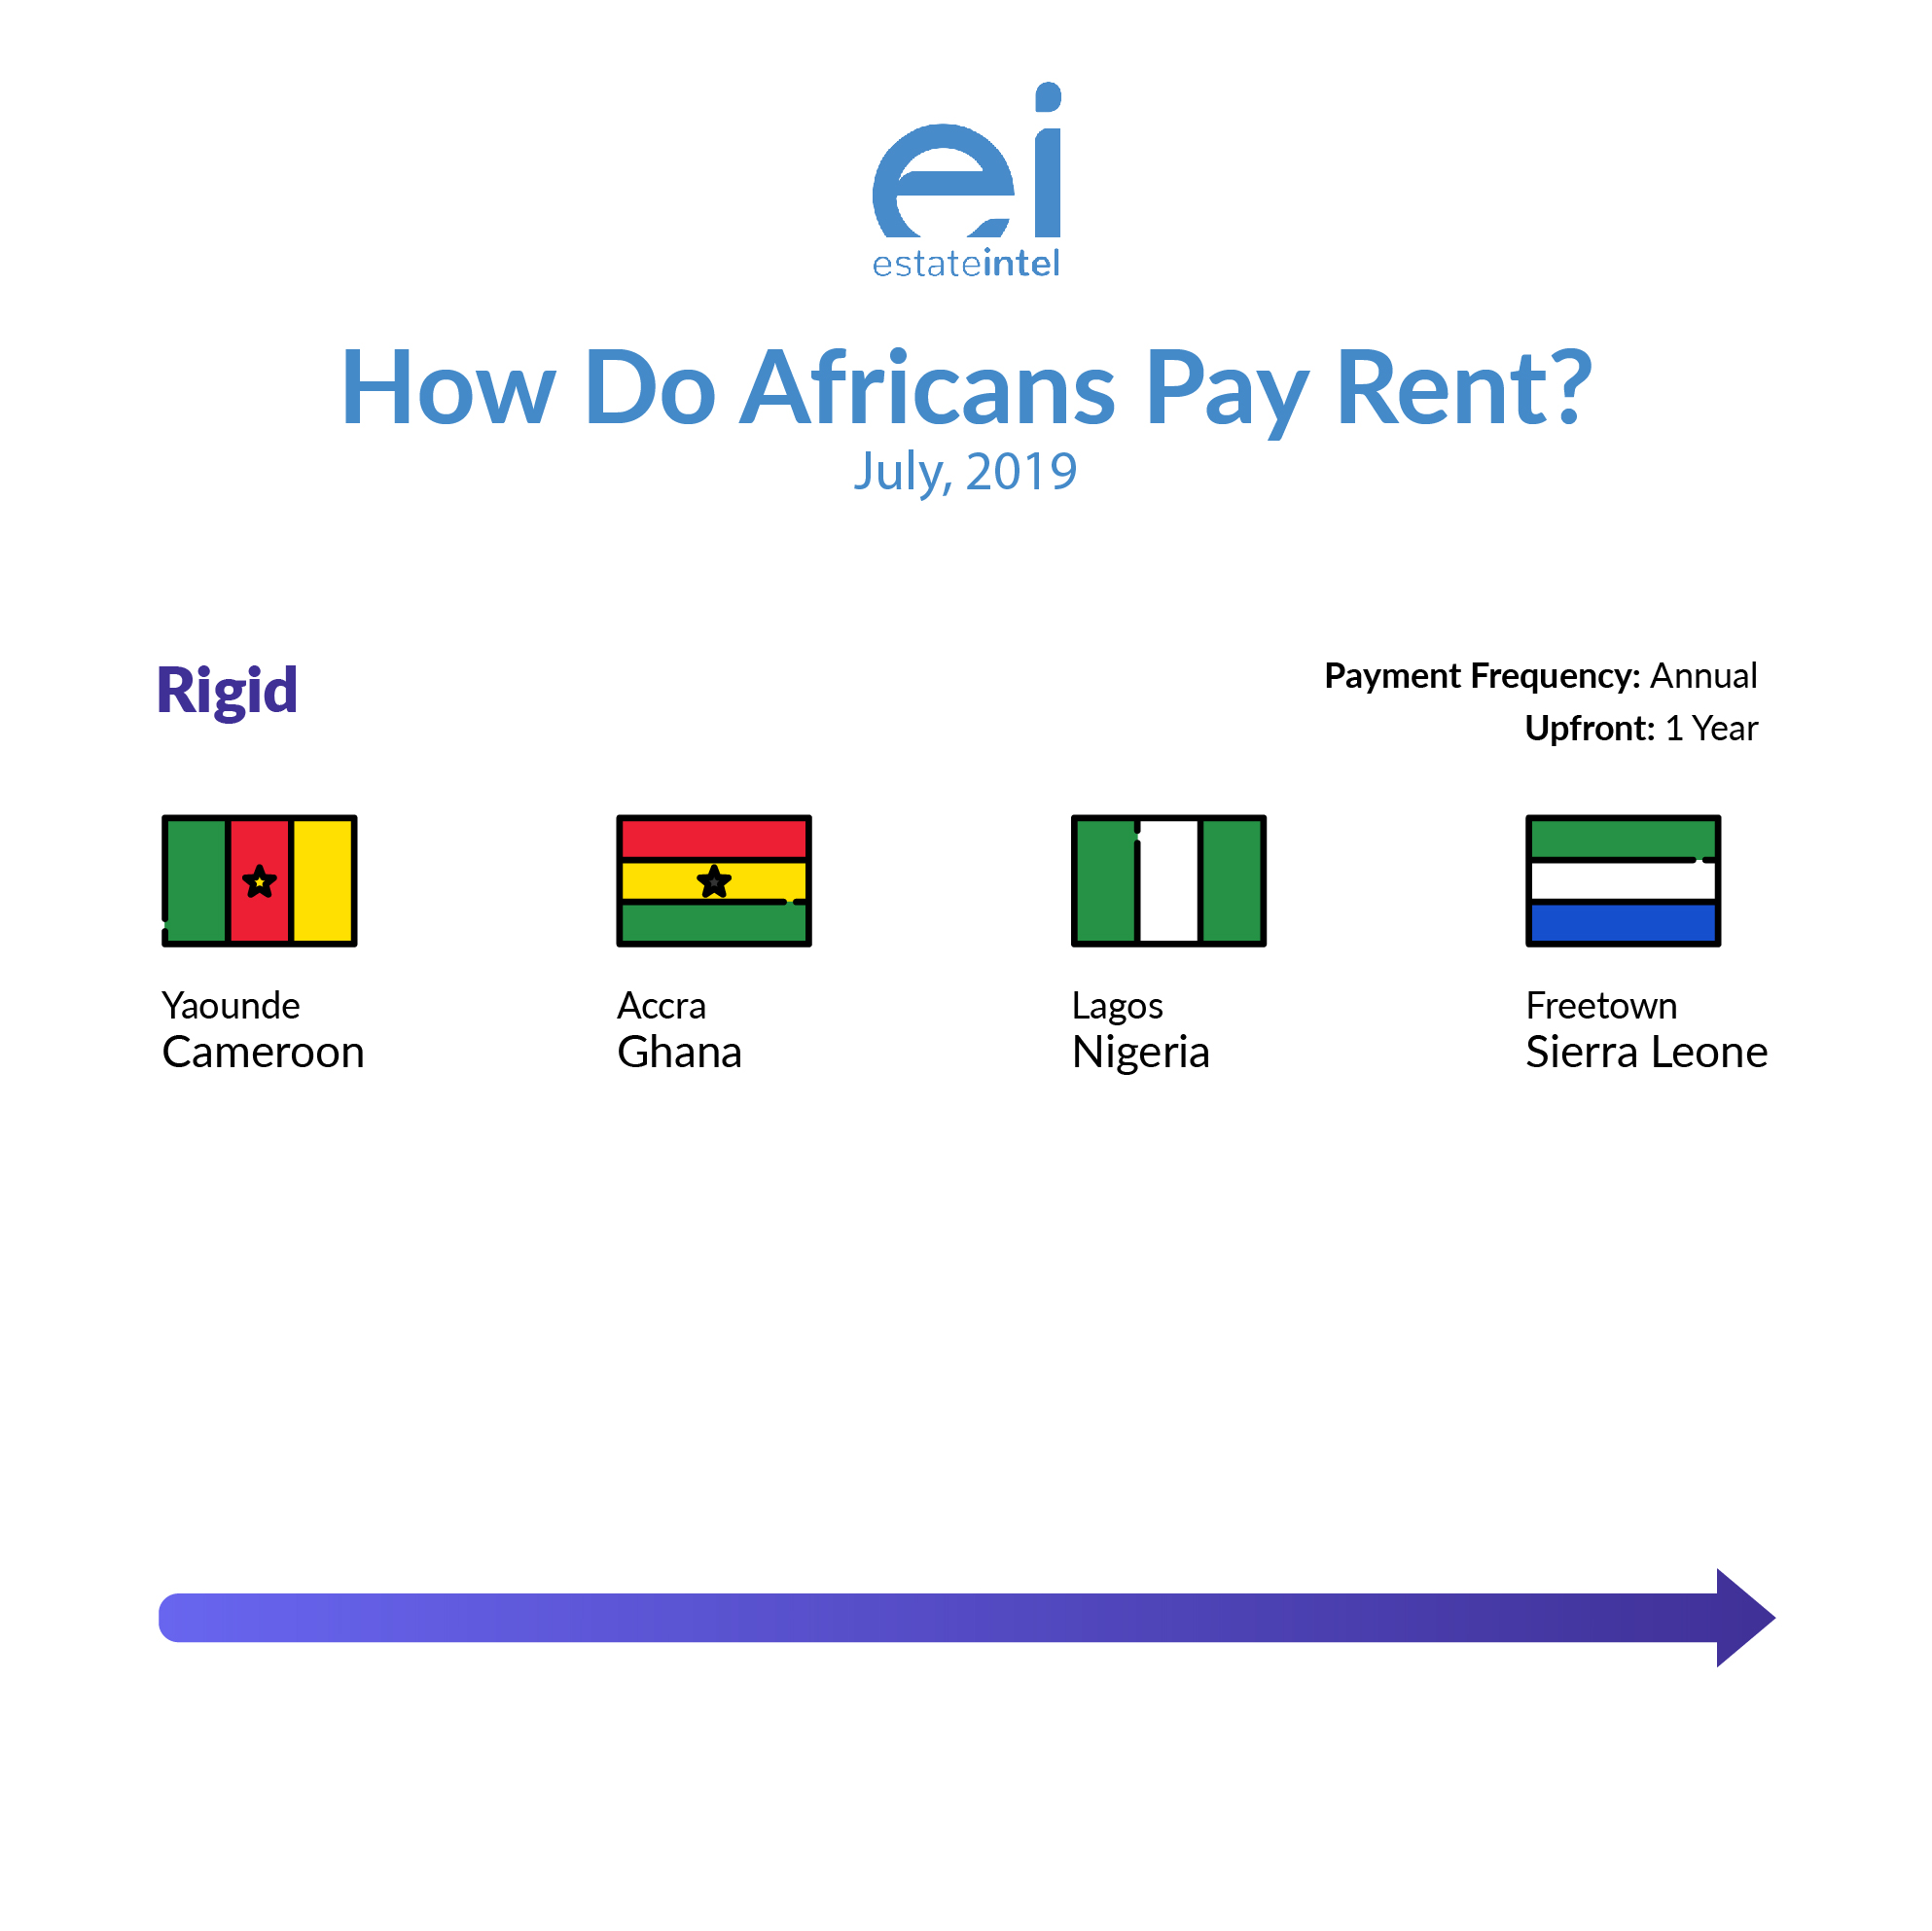 How do Africans pay rent?